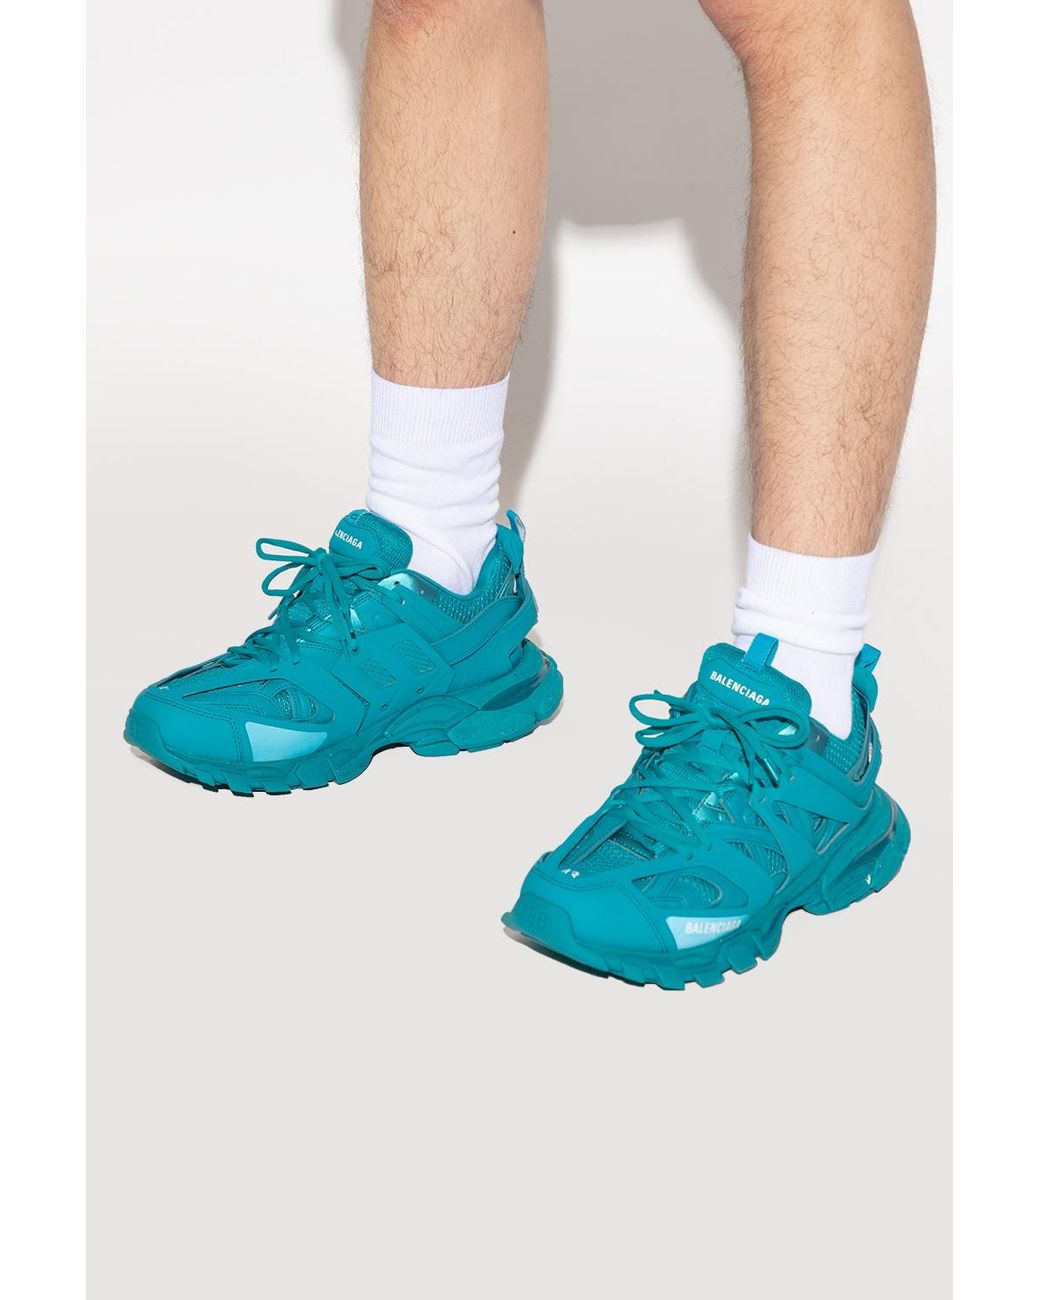 Balenciaga 'track' Sneakers in Blue for Men | Lyst